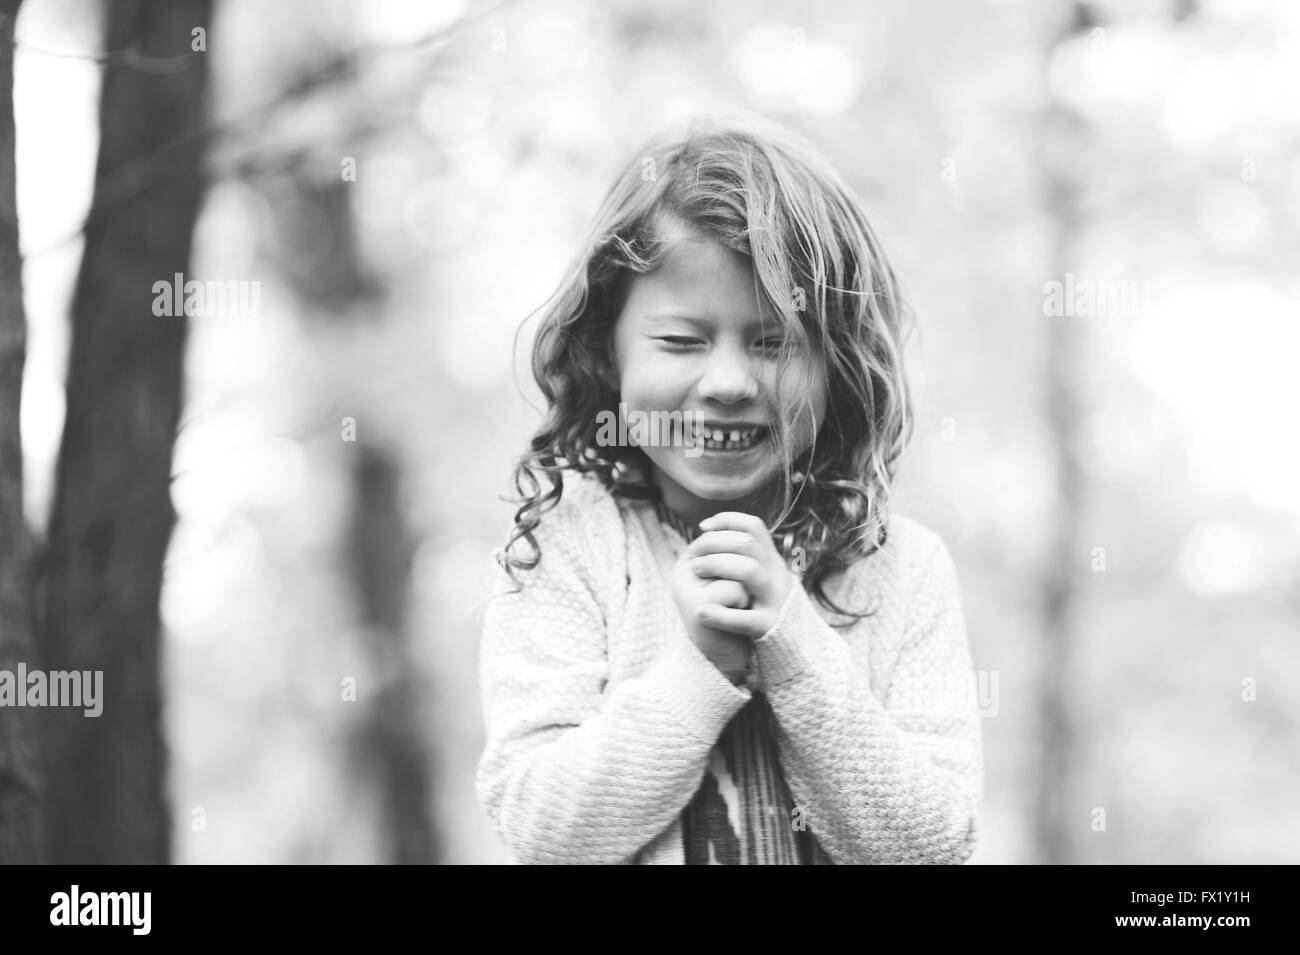 Black and white image of a girl laughing with her eyes shut. Stock Photo